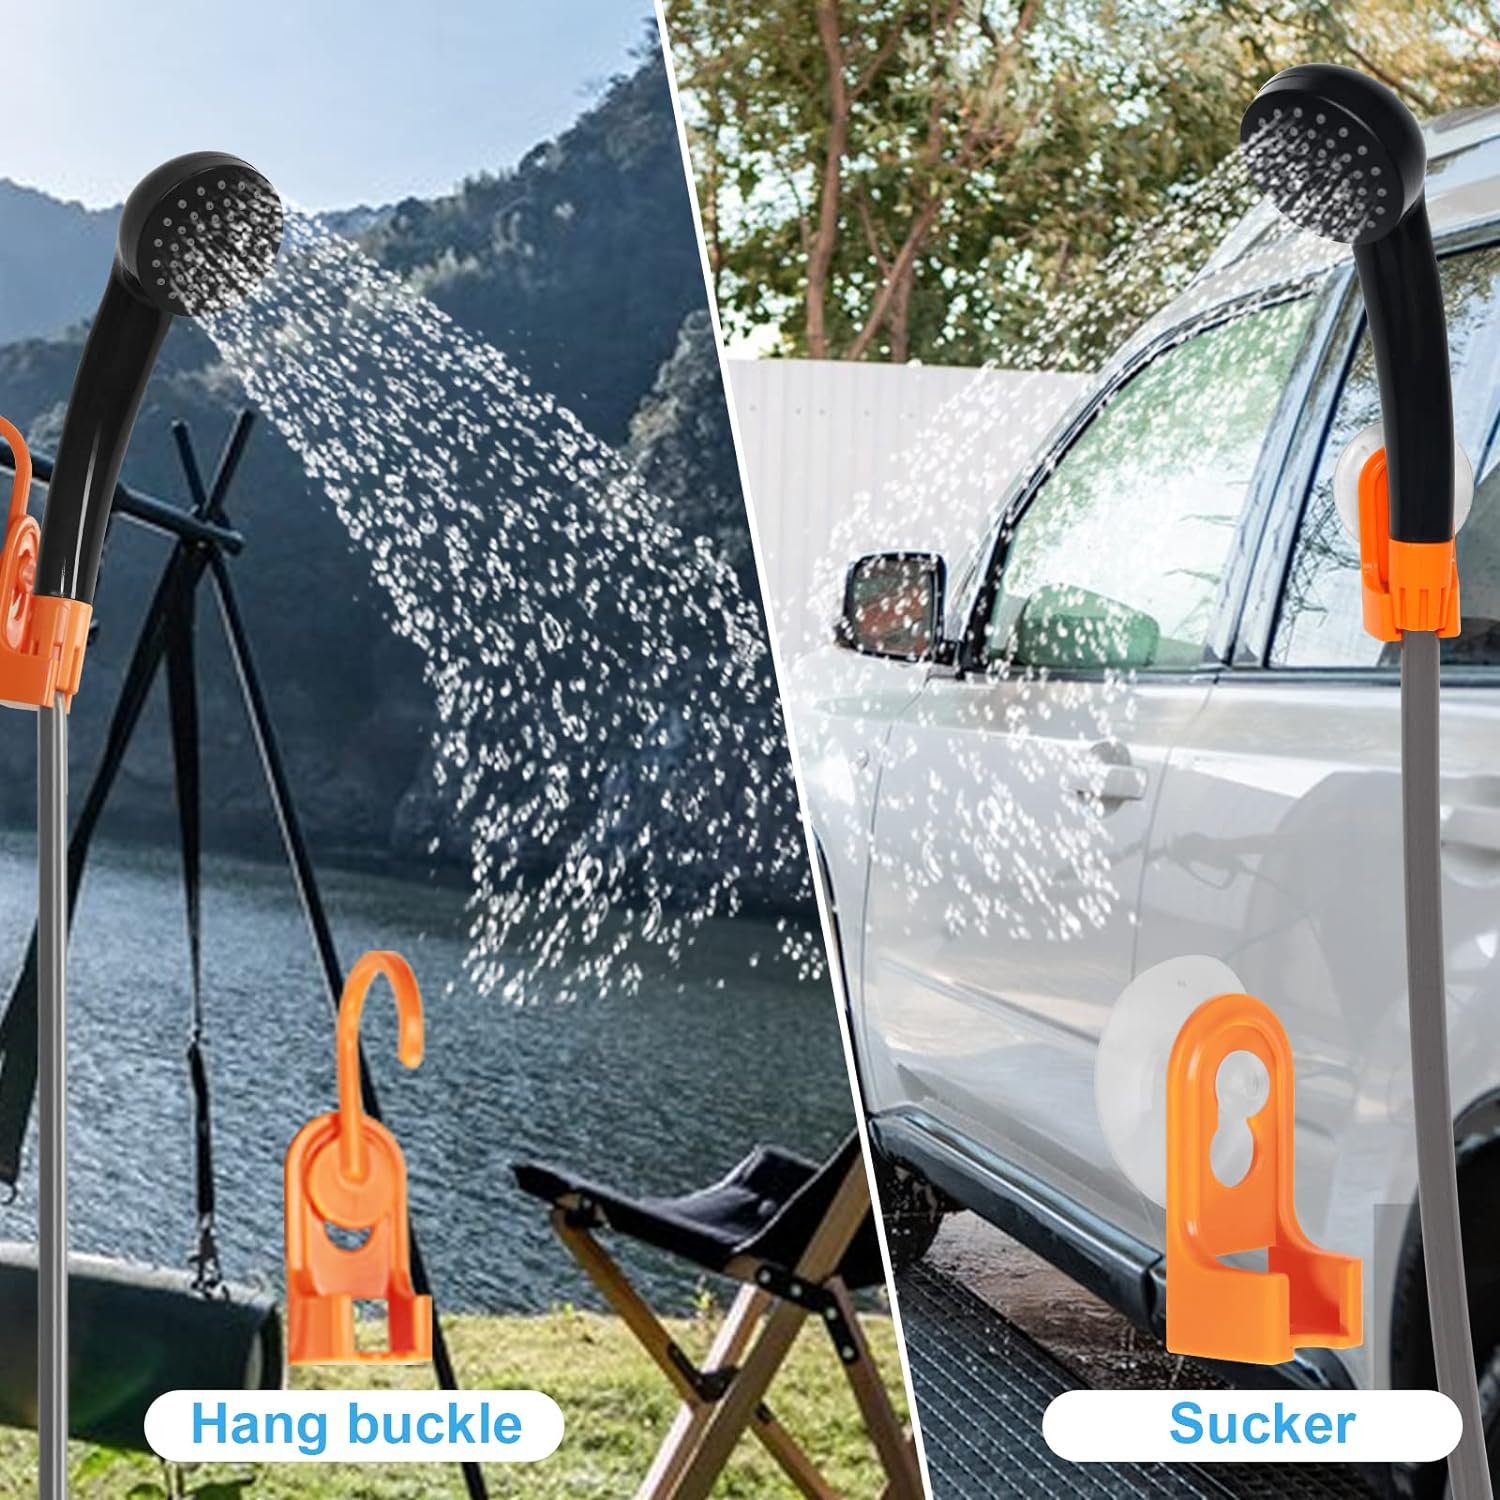 Portable Shower for Camping, Rechargeable Portable Camping Shower, Camp Shower with Double Portable Shower Head and 2 Flow Mode, Camping Shower for Hiking Beach Swimming Outdoor